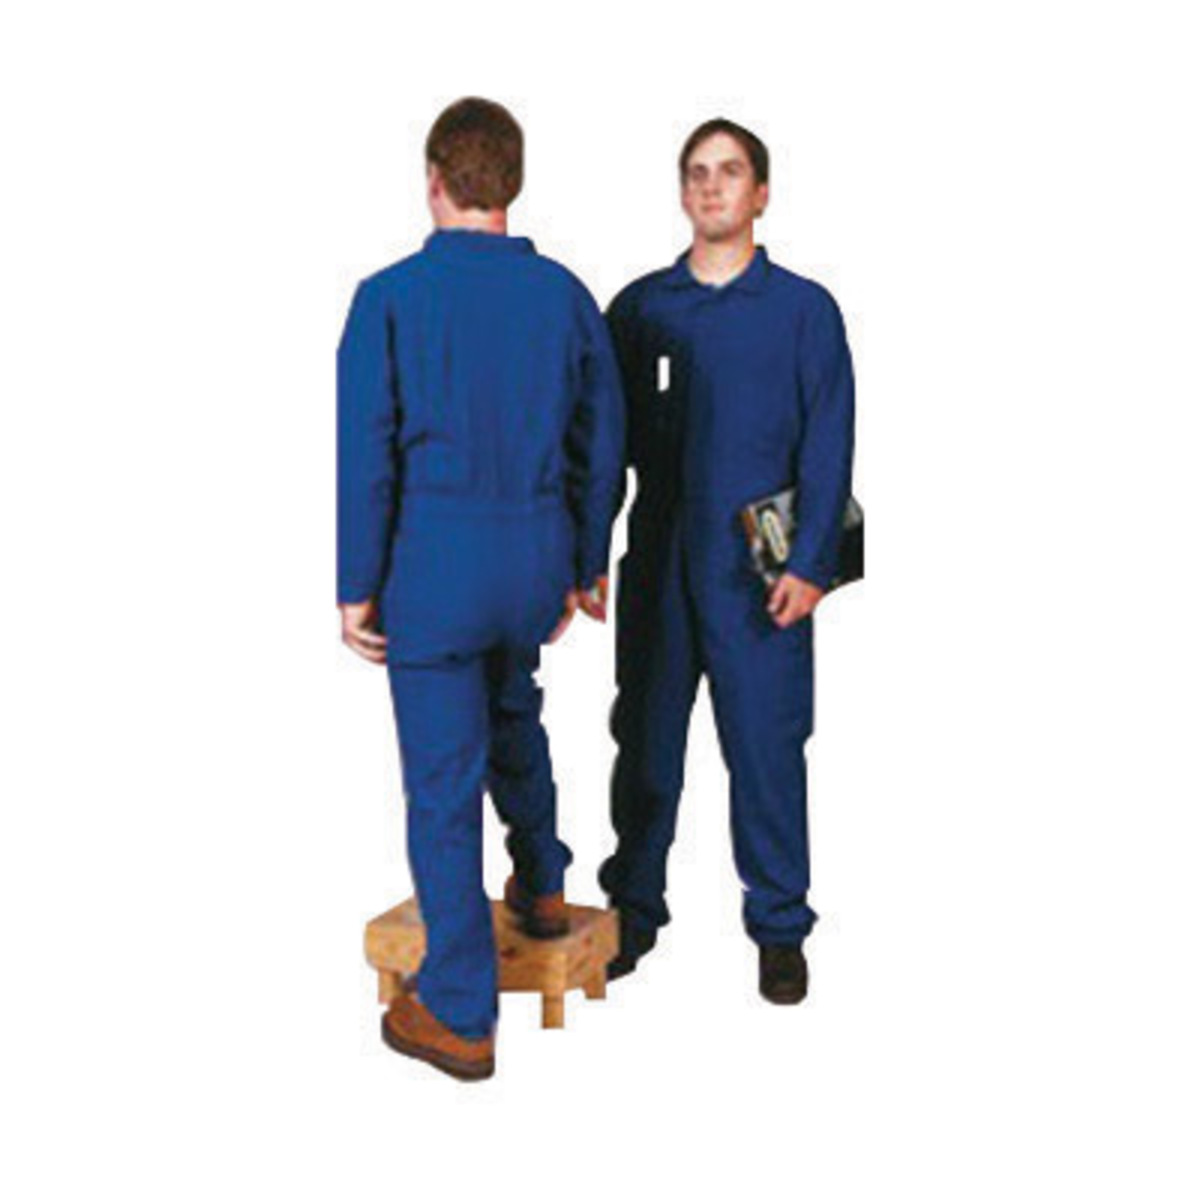 Stanco Safety Products™ 2X Royal Blue Nomex® IIIA Arc Rated Flame Resistant Coveralls With Concealed 2-Way Front Zipper Closure